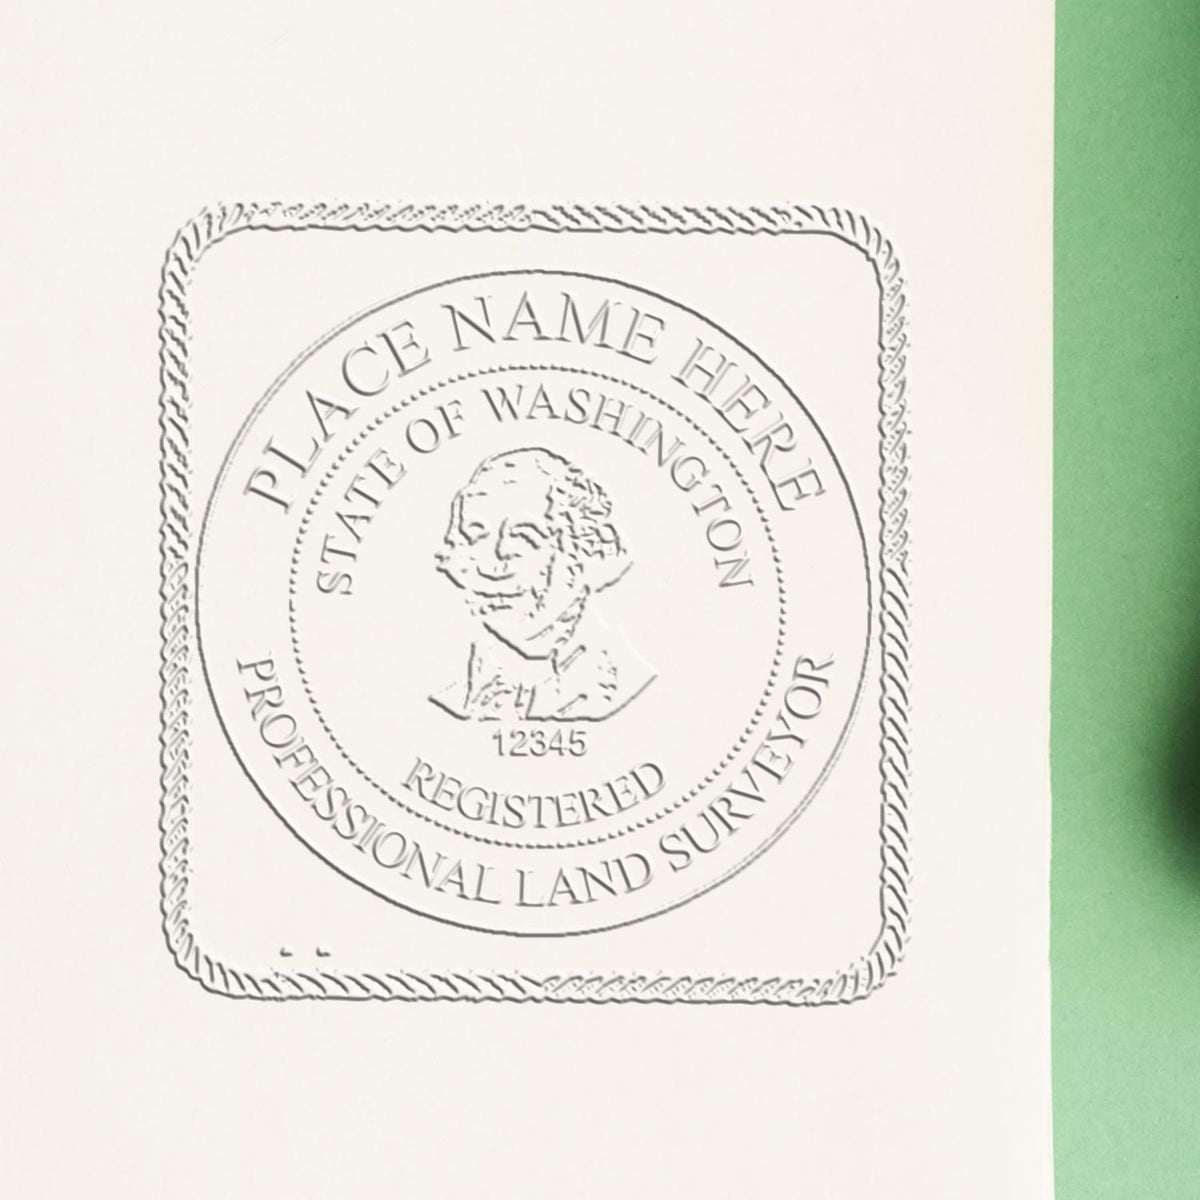 The Gift Washington Land Surveyor Seal stamp impression comes to life with a crisp, detailed image stamped on paper - showcasing true professional quality.